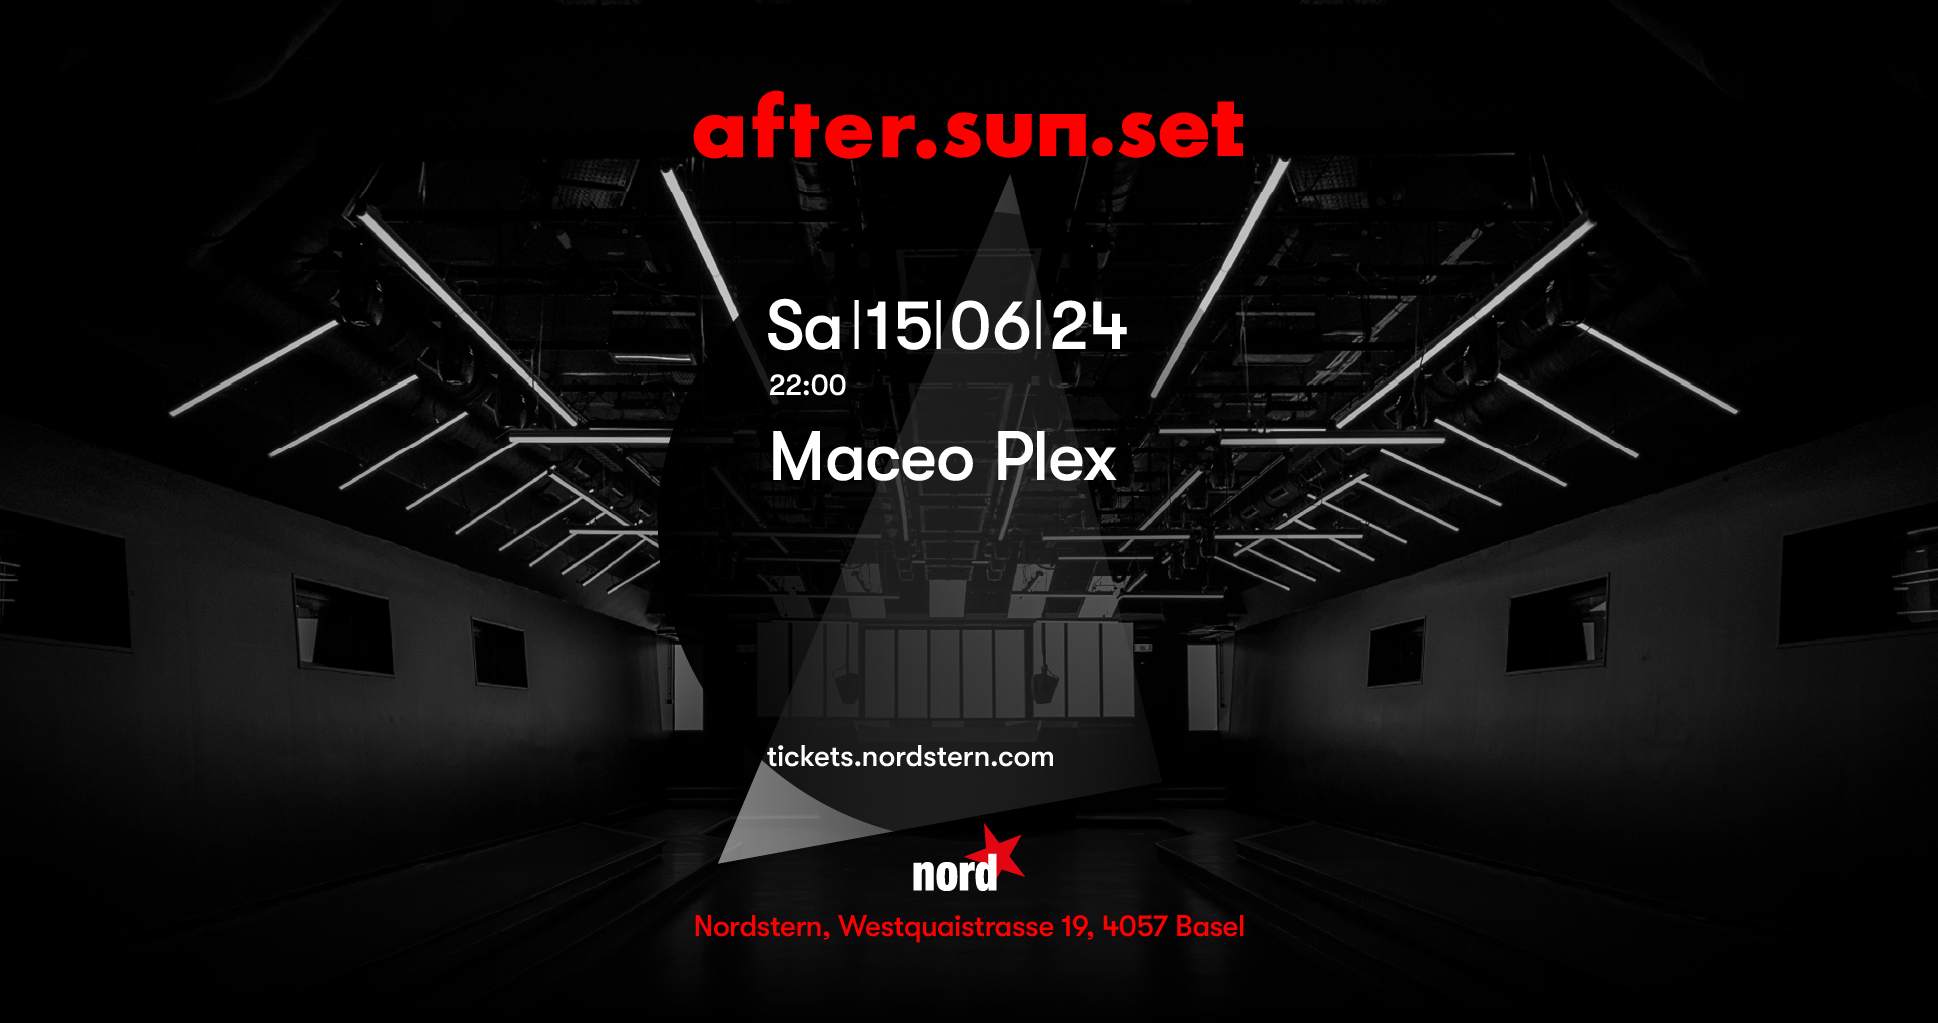 after.sun.set with Maceo Plex - フライヤー表